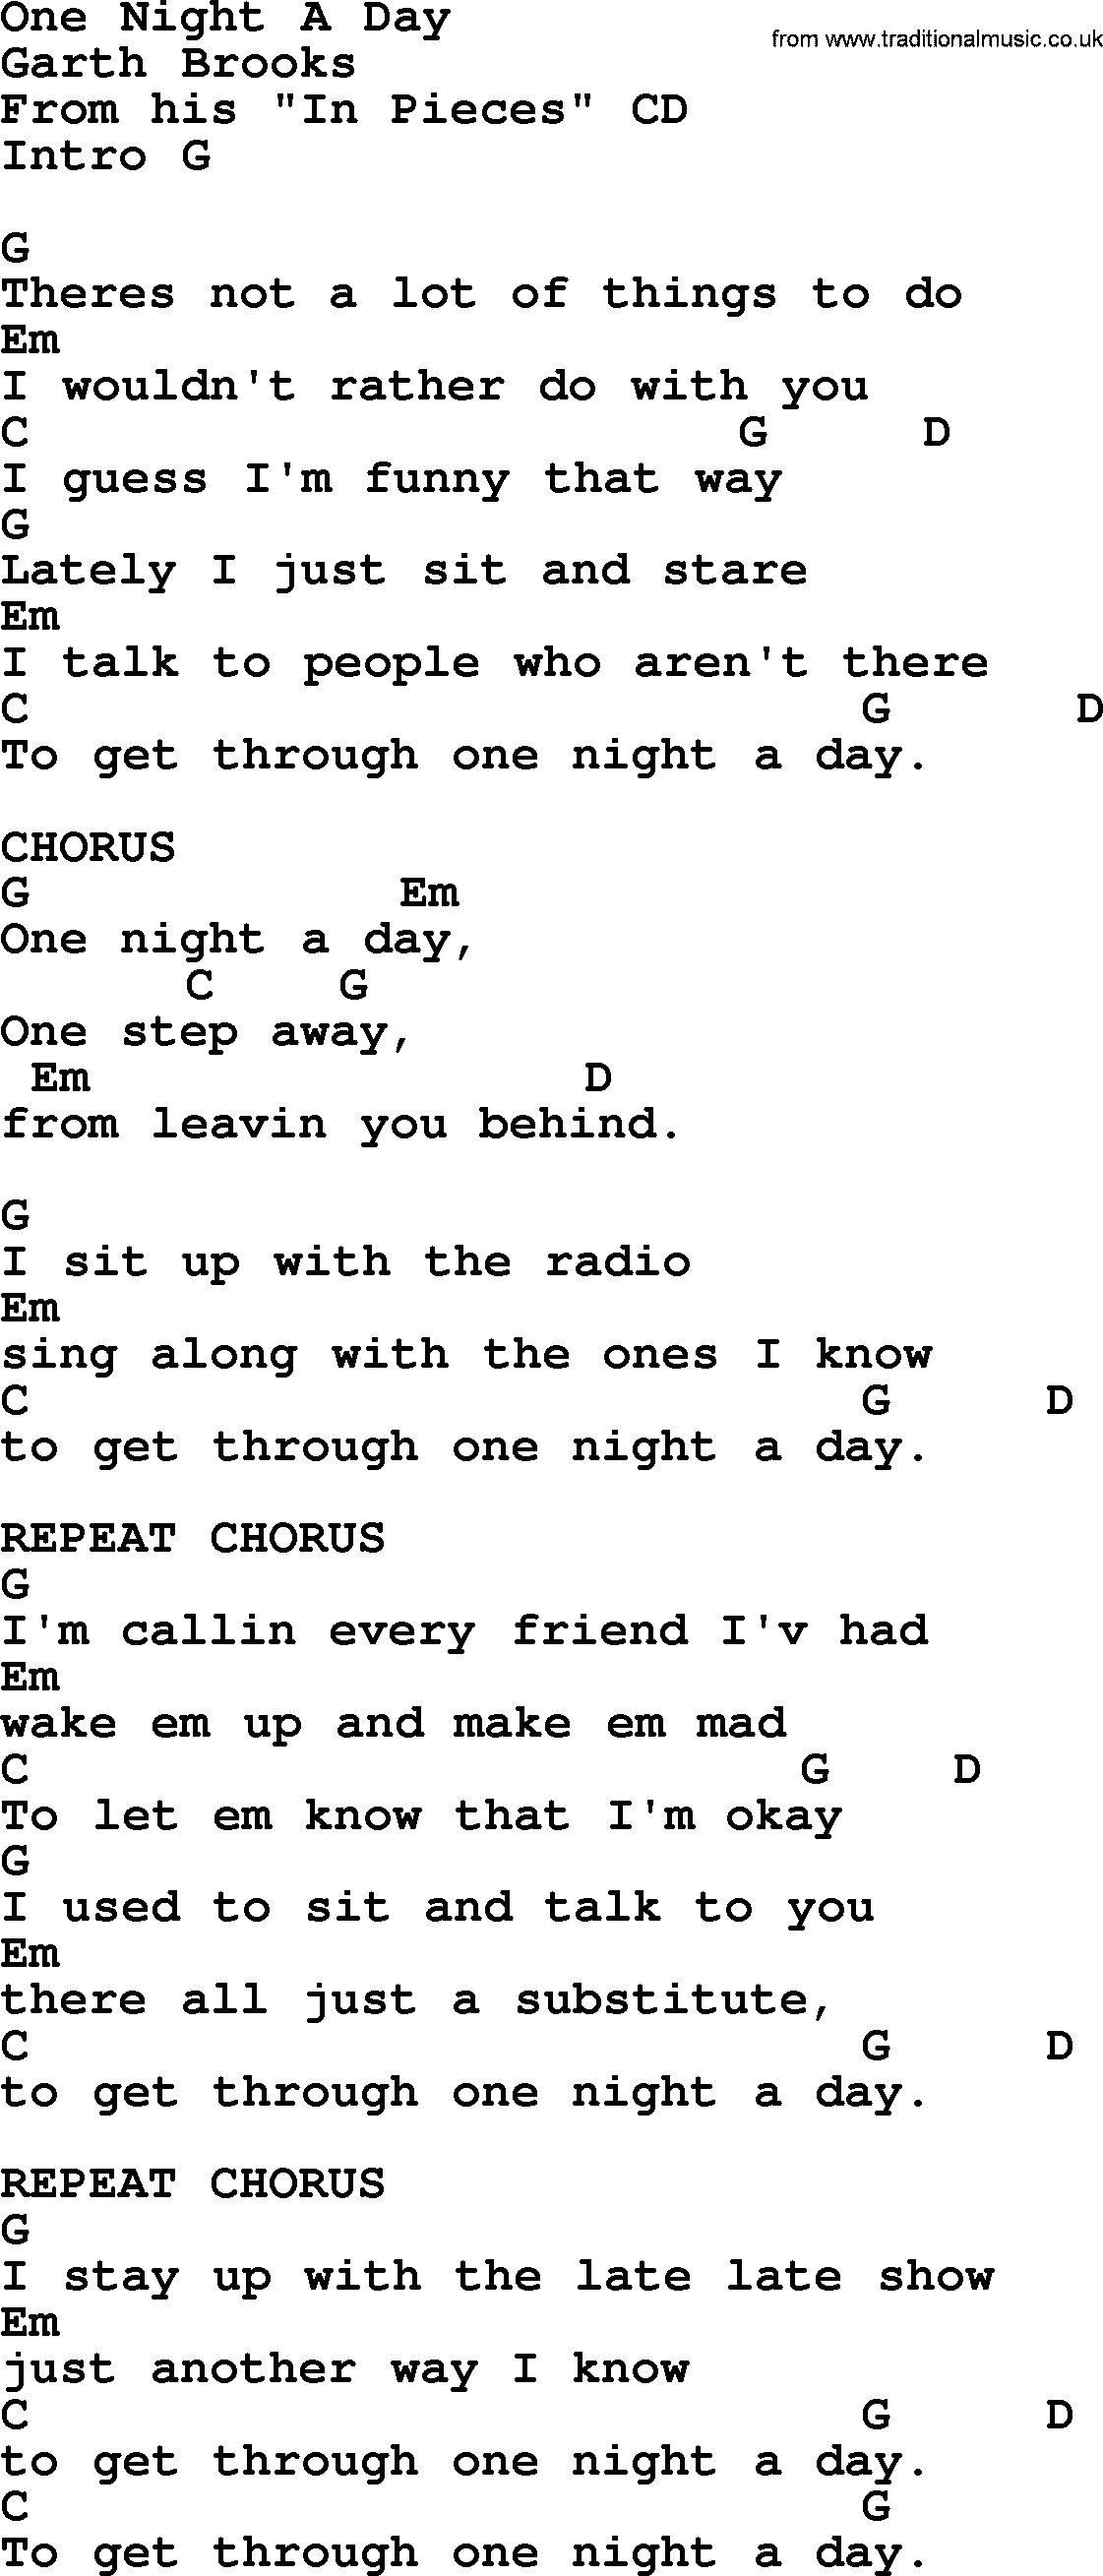 Garth Brooks song: One Night A Day, lyrics and chords